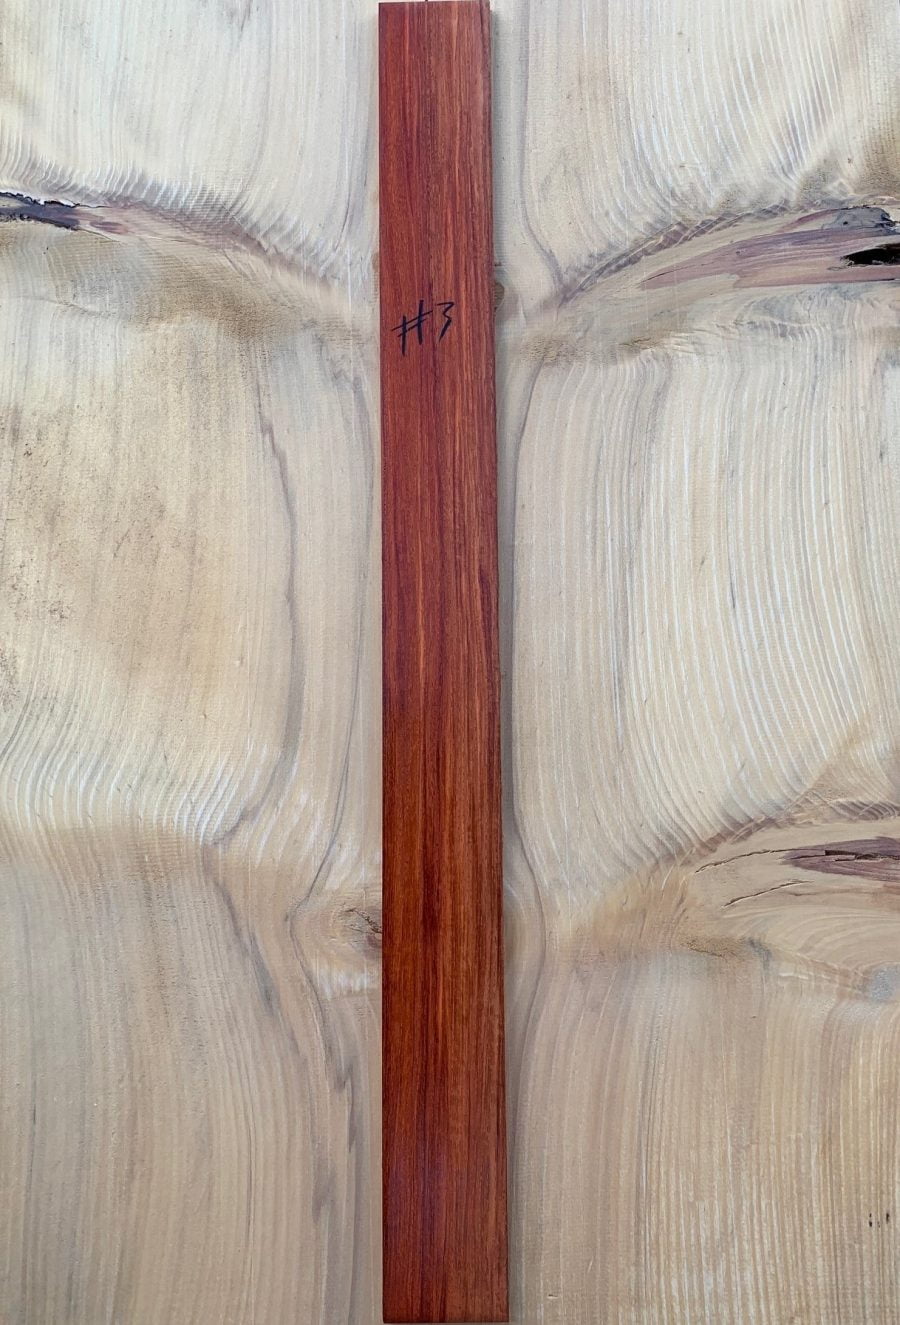 Red New Guinea Rosewood Fretboard